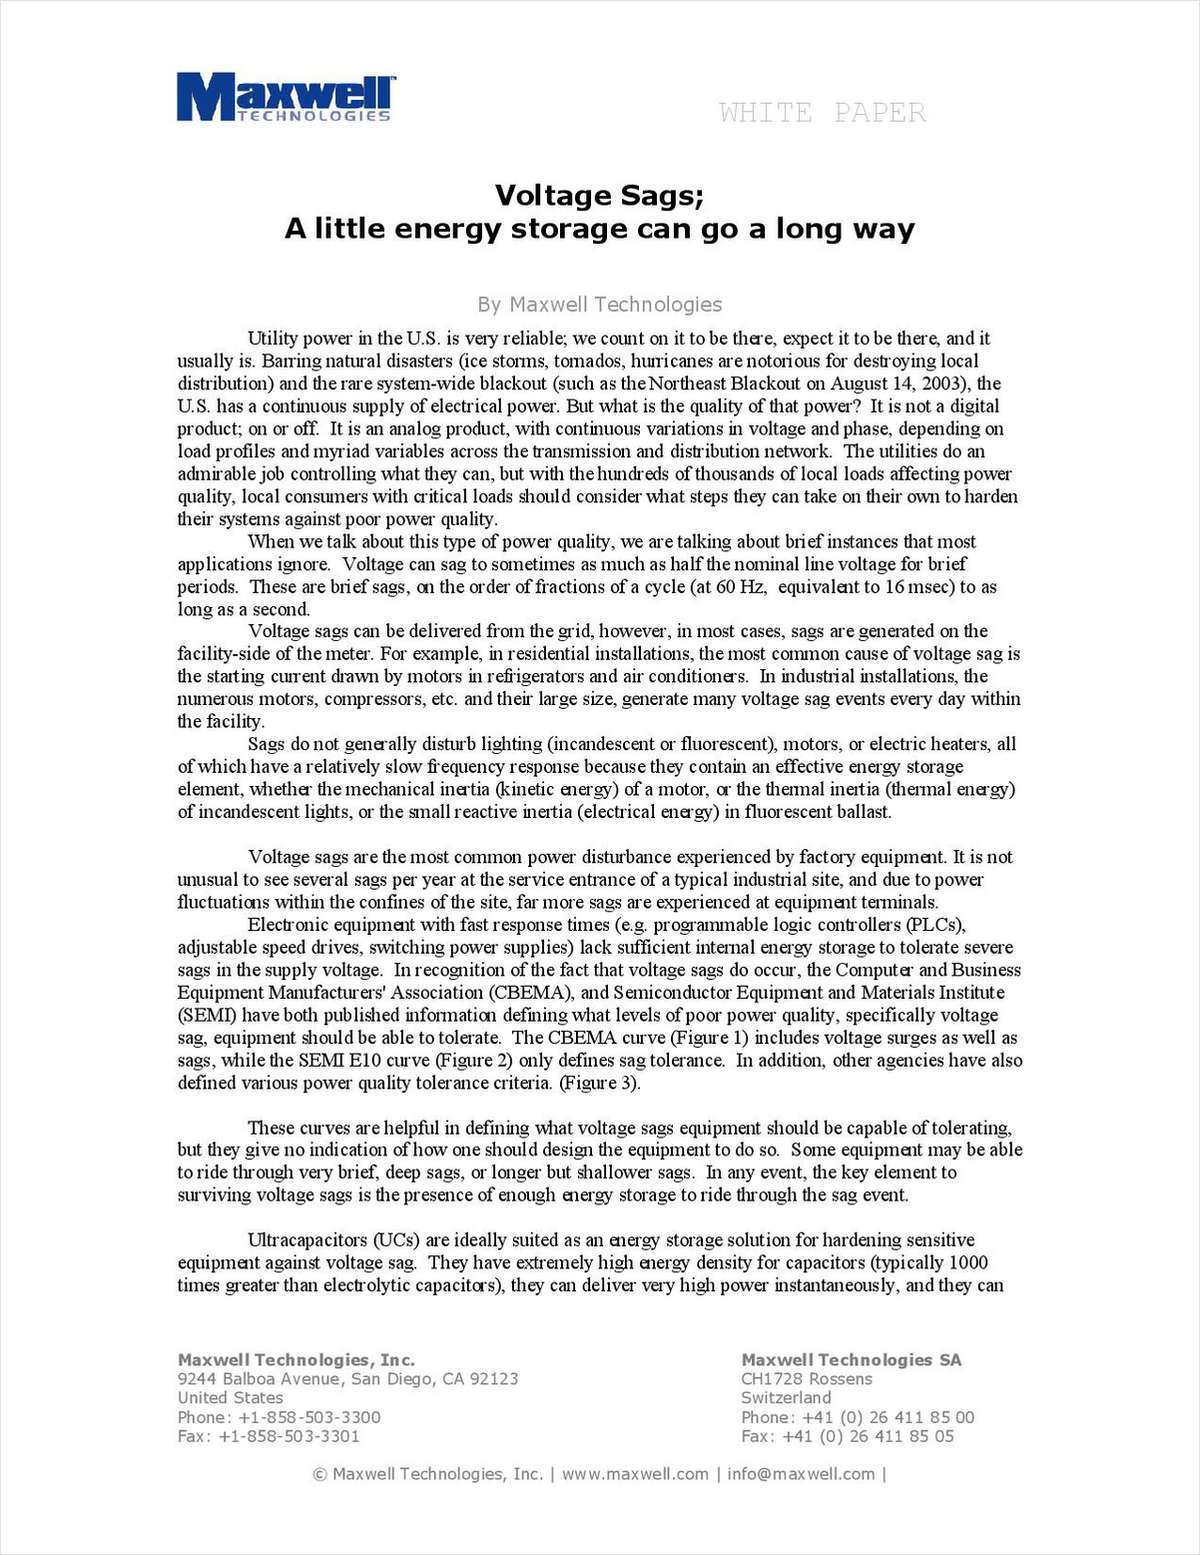 How a Little Energy Storage can go a Long Way